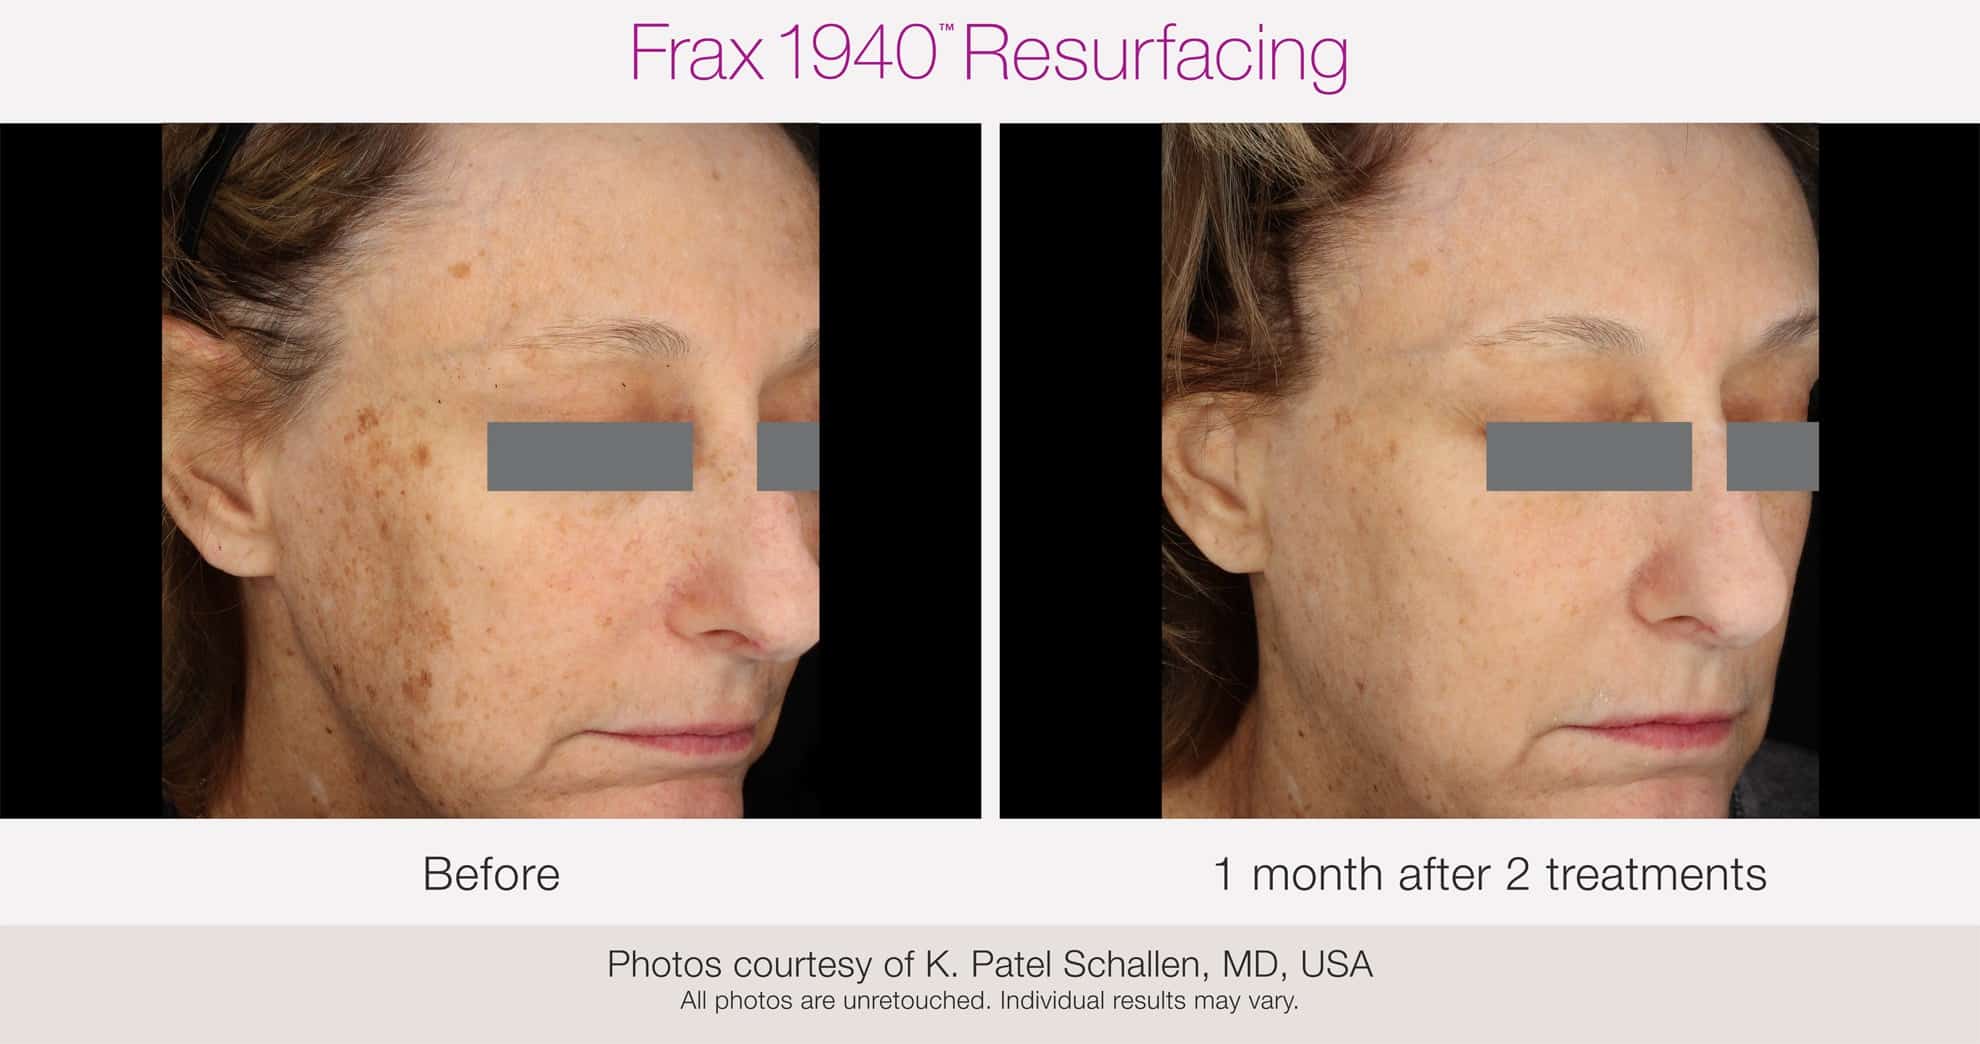 Frax 1940 Resurfacing, before and after, Miami